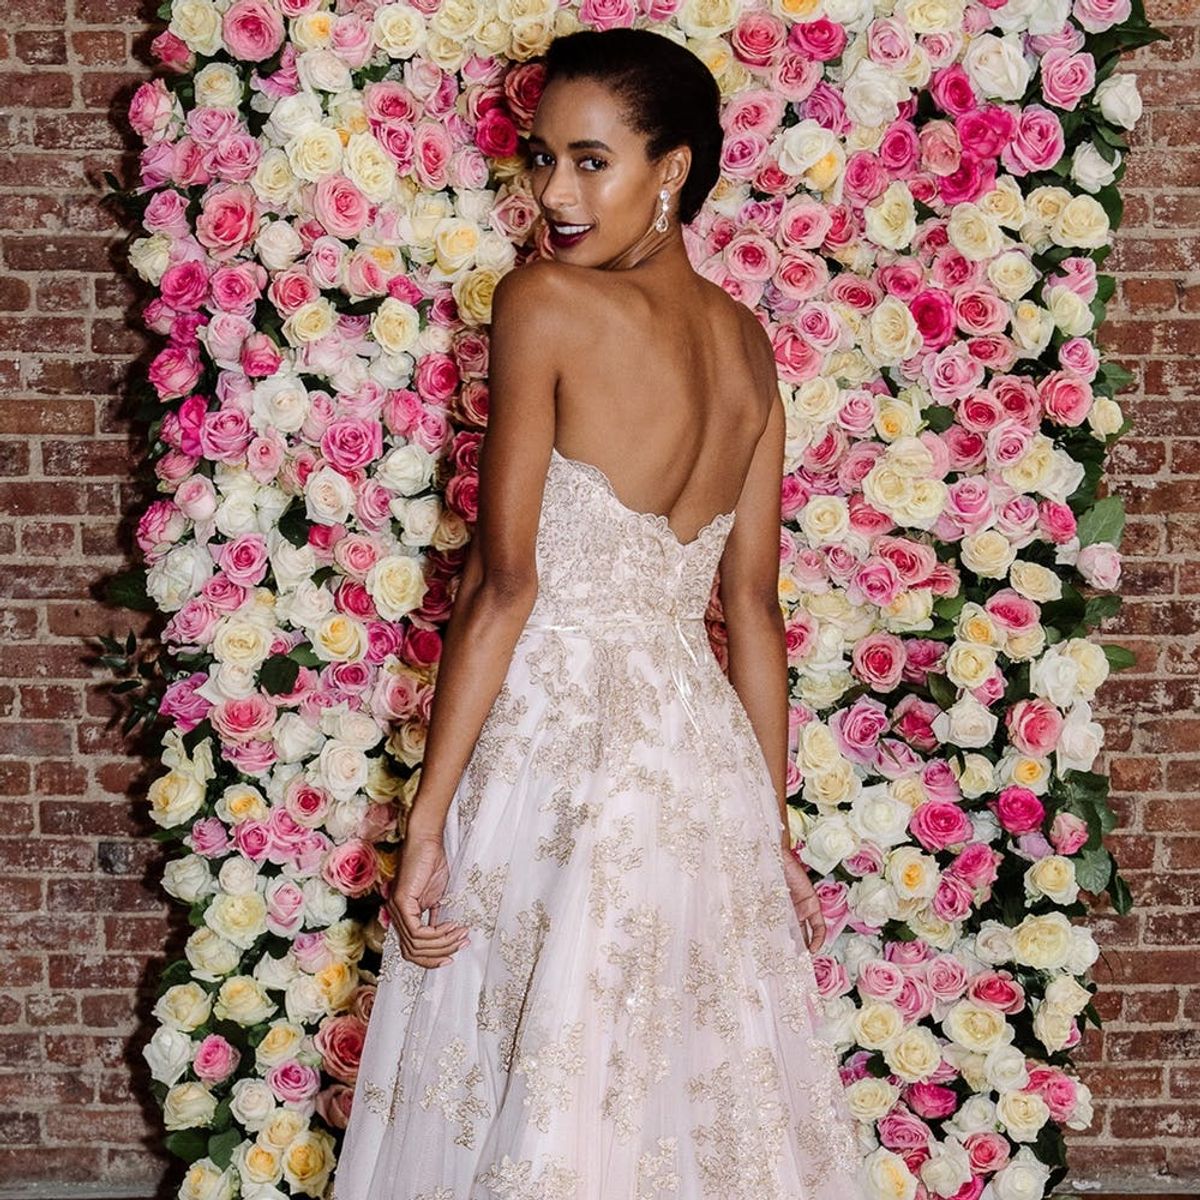 The Newest Collection from David’s Bridal Offers Some NEXT Level Looks